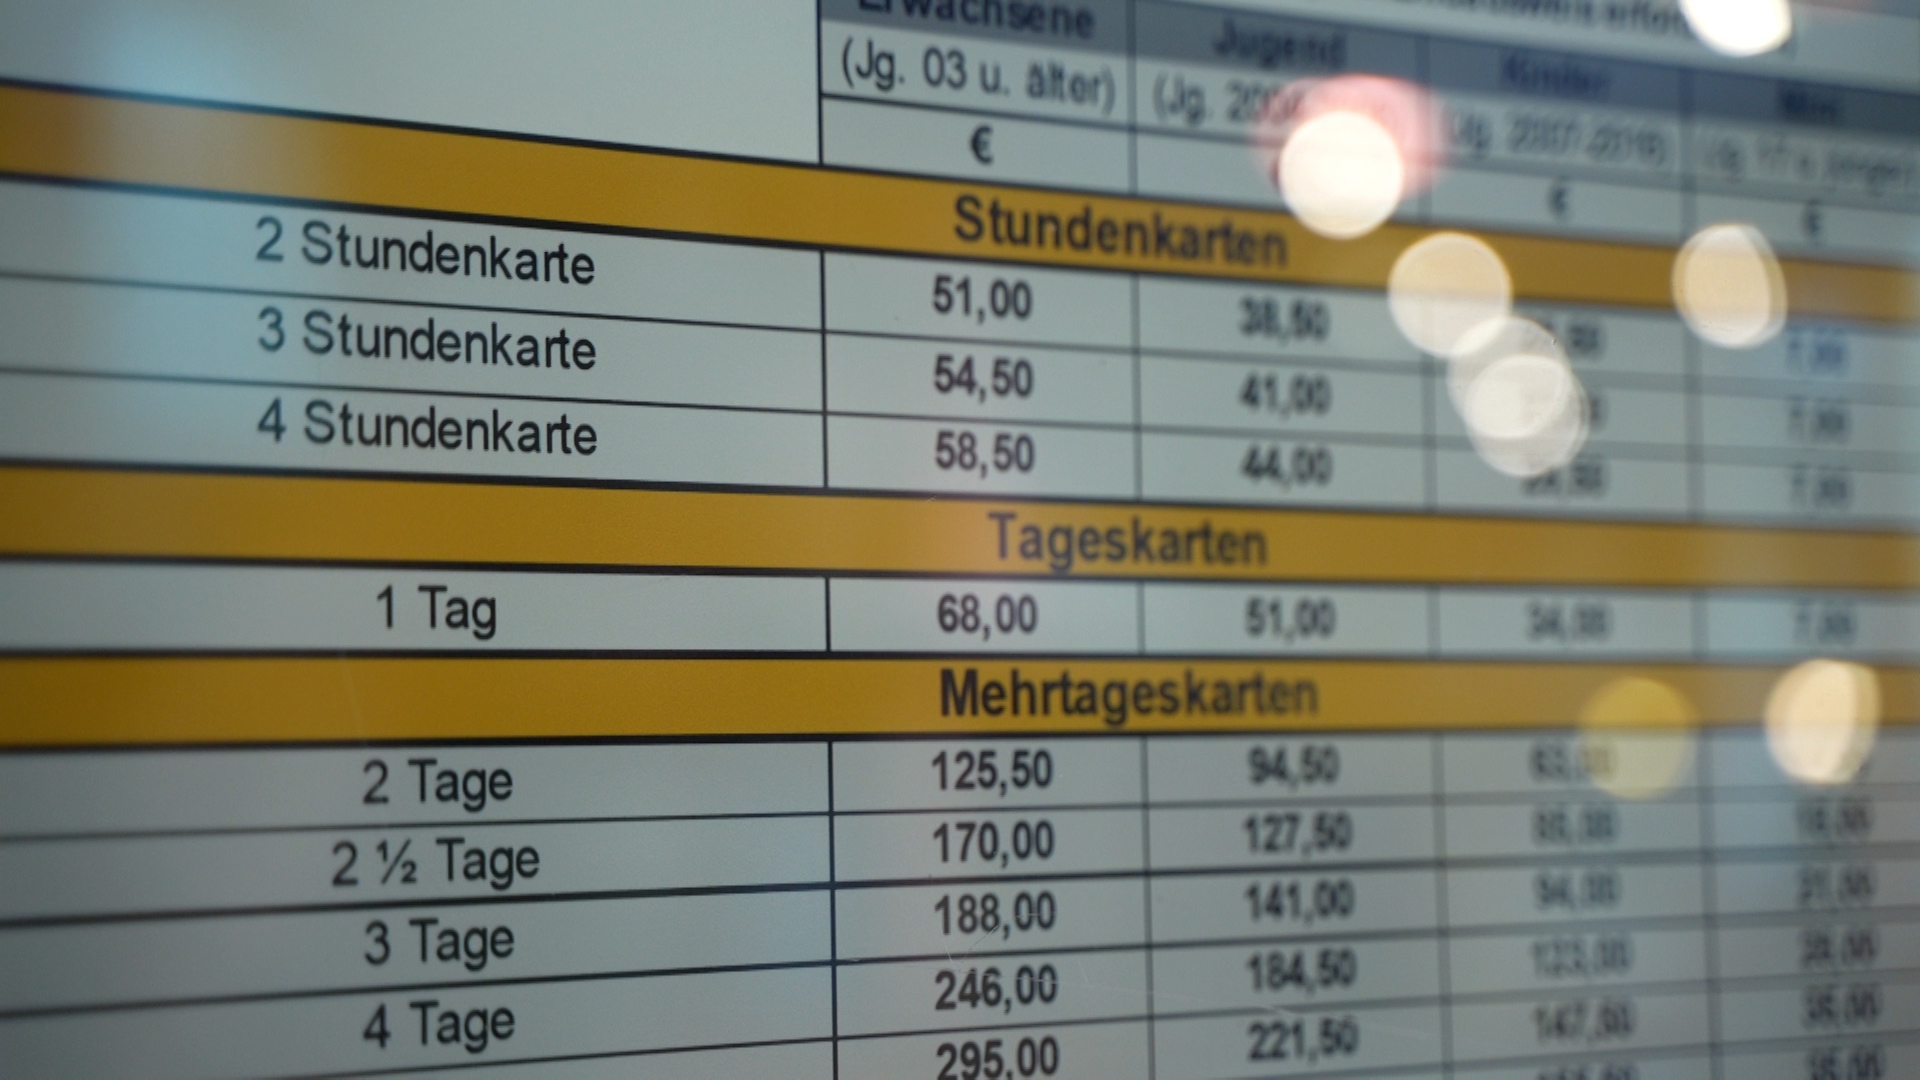 Across Austria most day passes now cost above $60, in Zauchensee the price is at $72./CGTN/Andreas Gasser